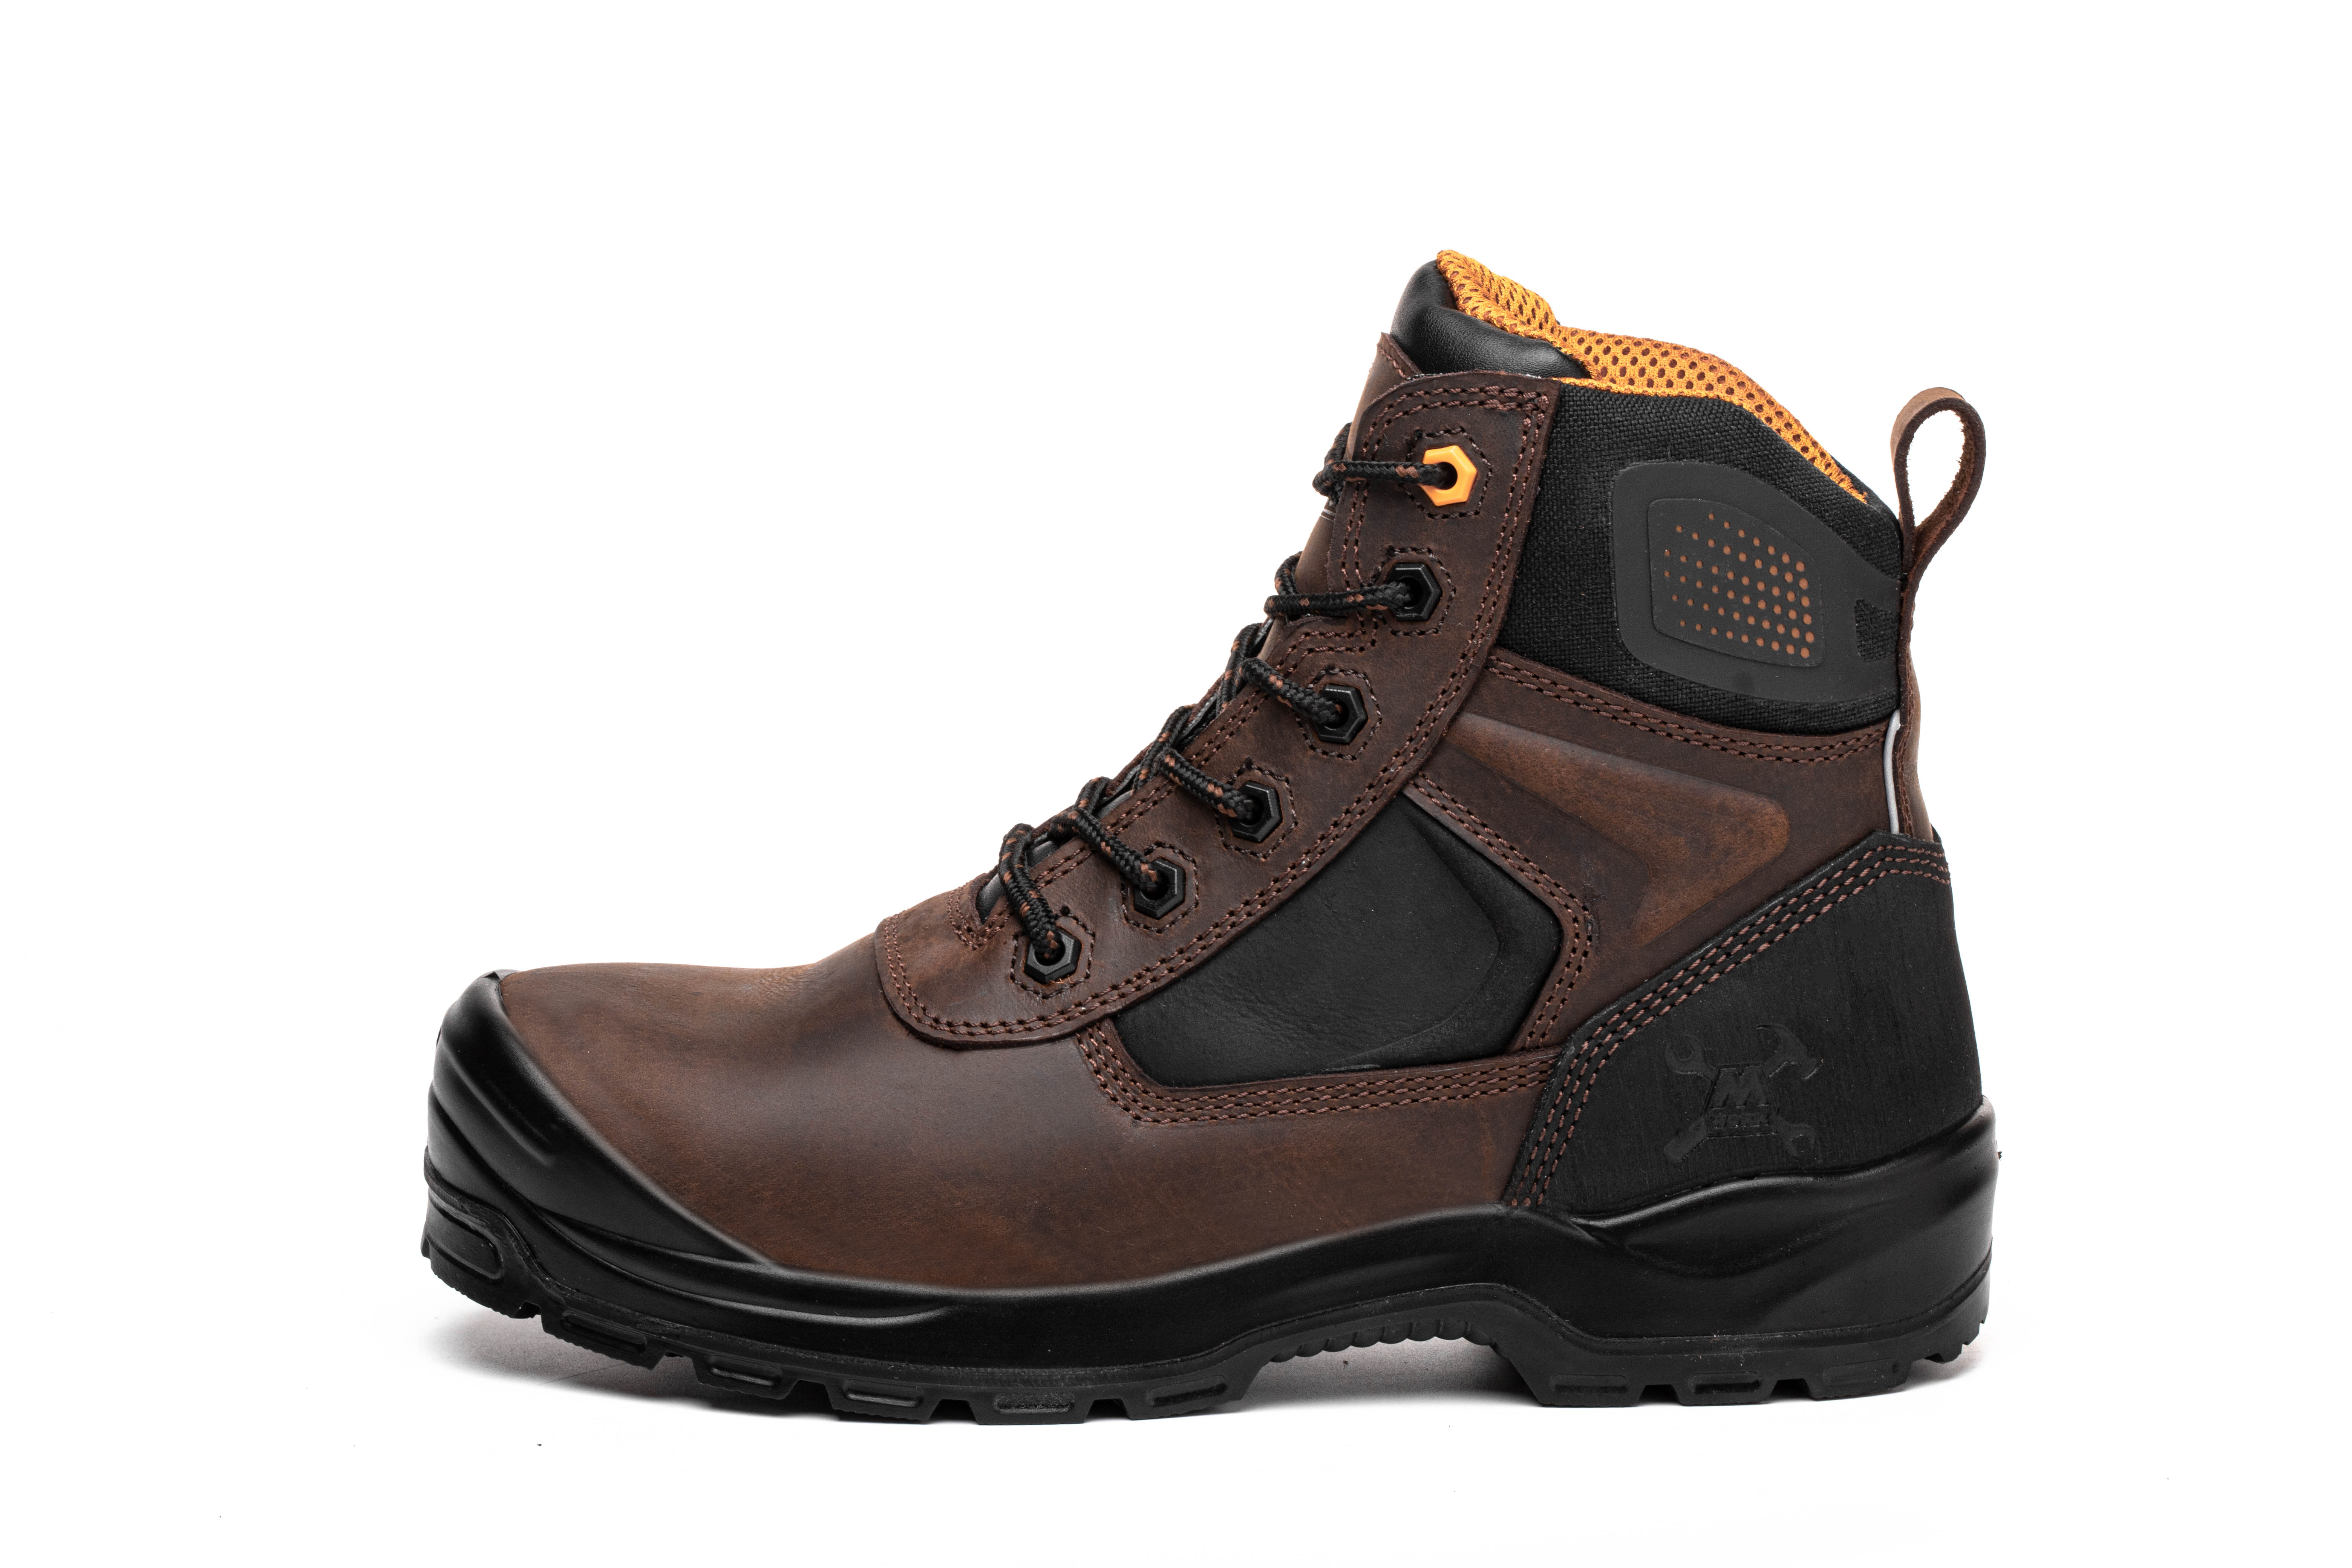 Durable and Waterproof Men's Work Boots with Steel Toe Protection